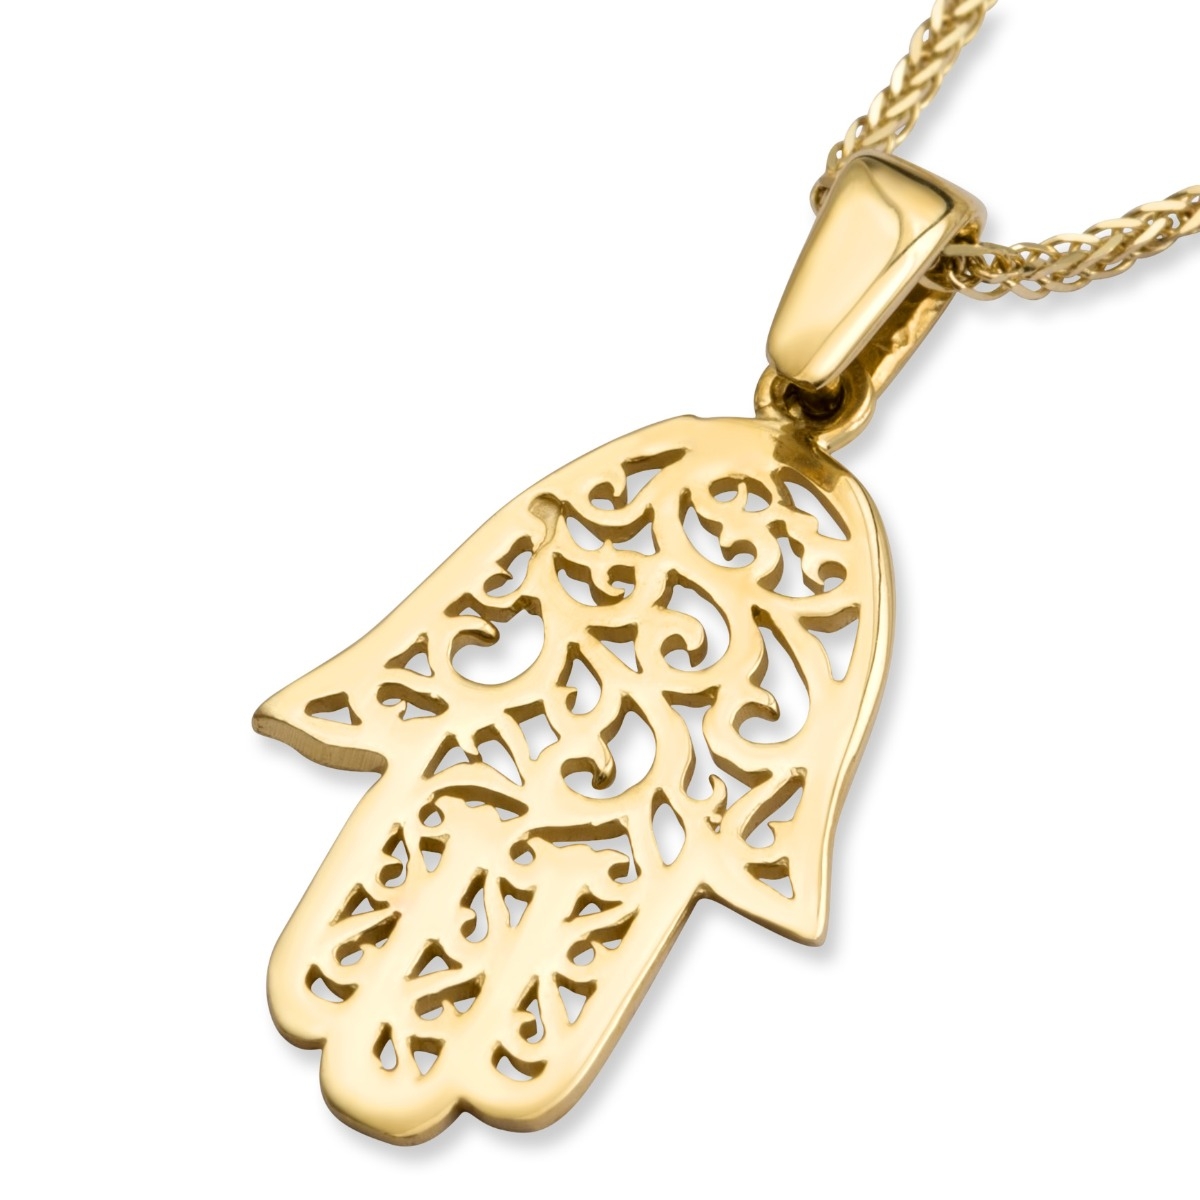 Chic 14K Yellow Gold Hamsa Pendant Necklace With Ornate Design - 1